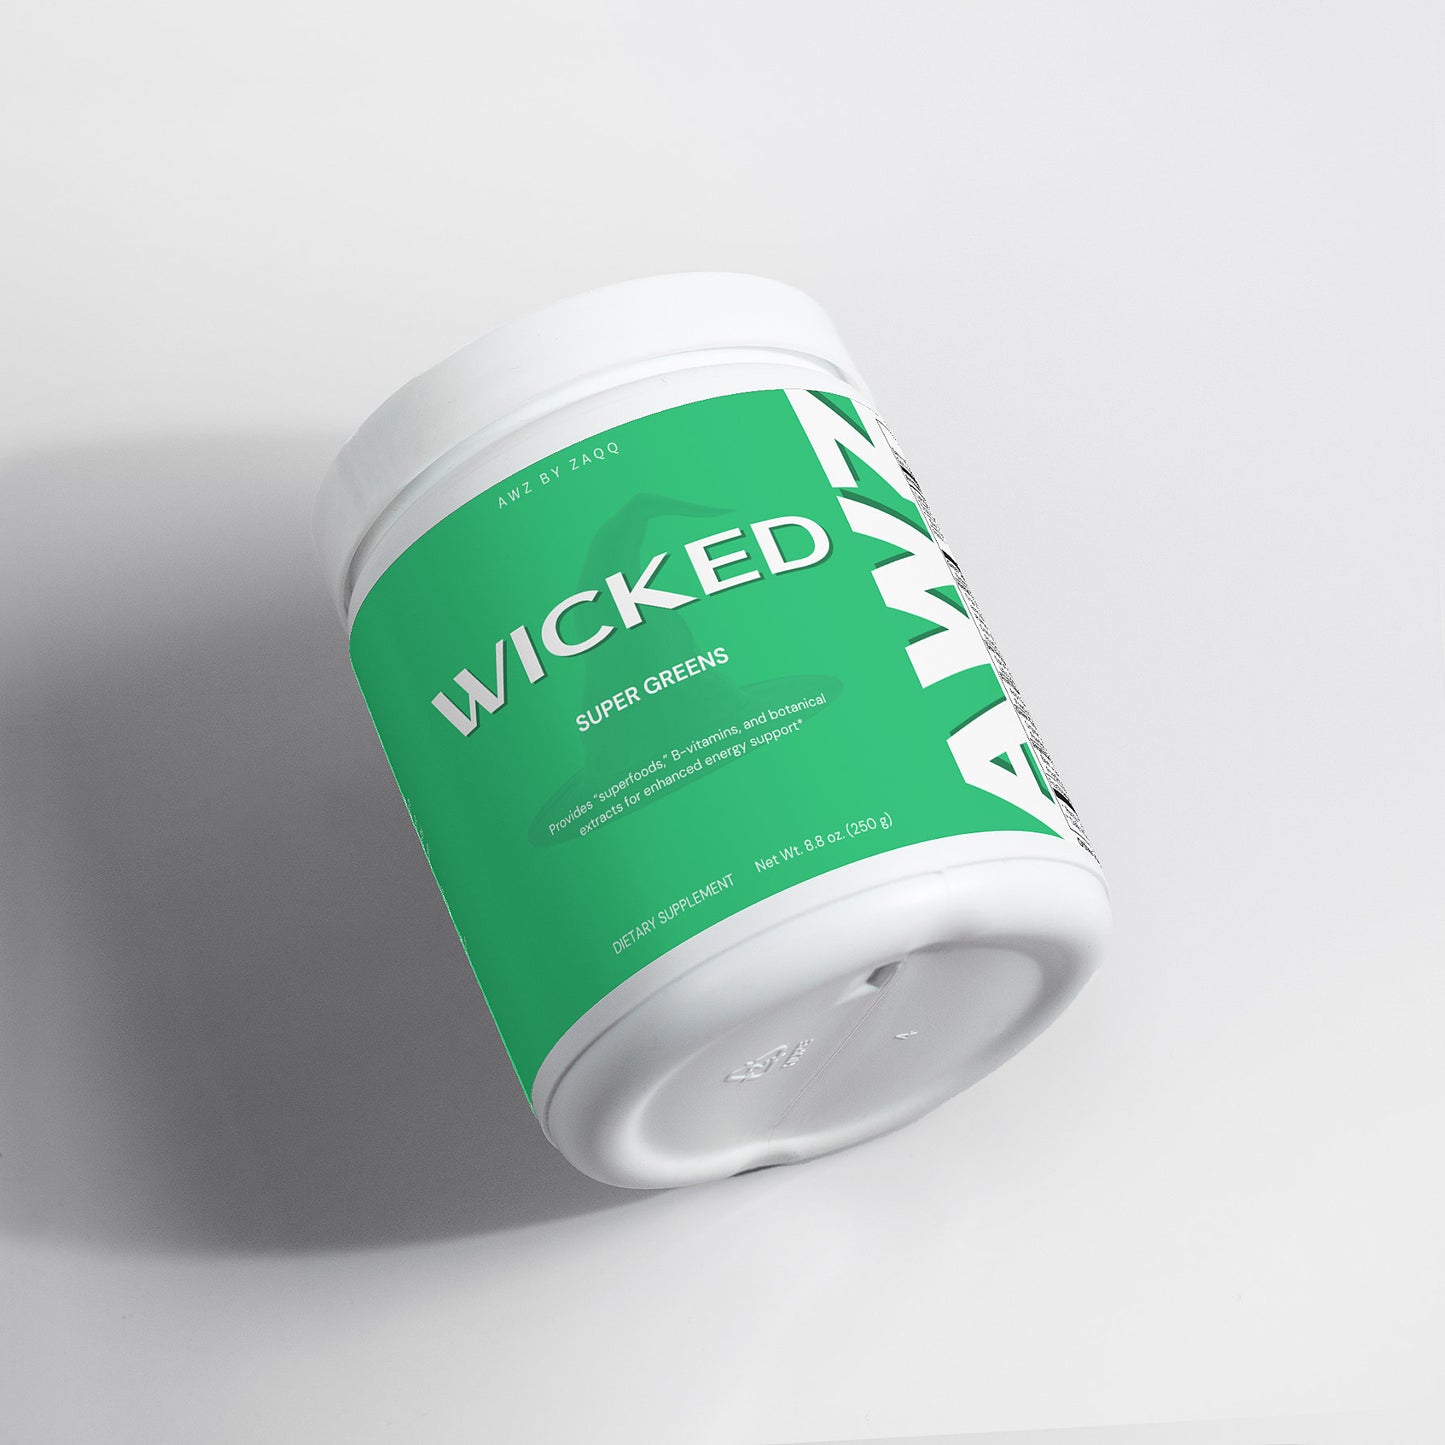 Wicked Super Greens